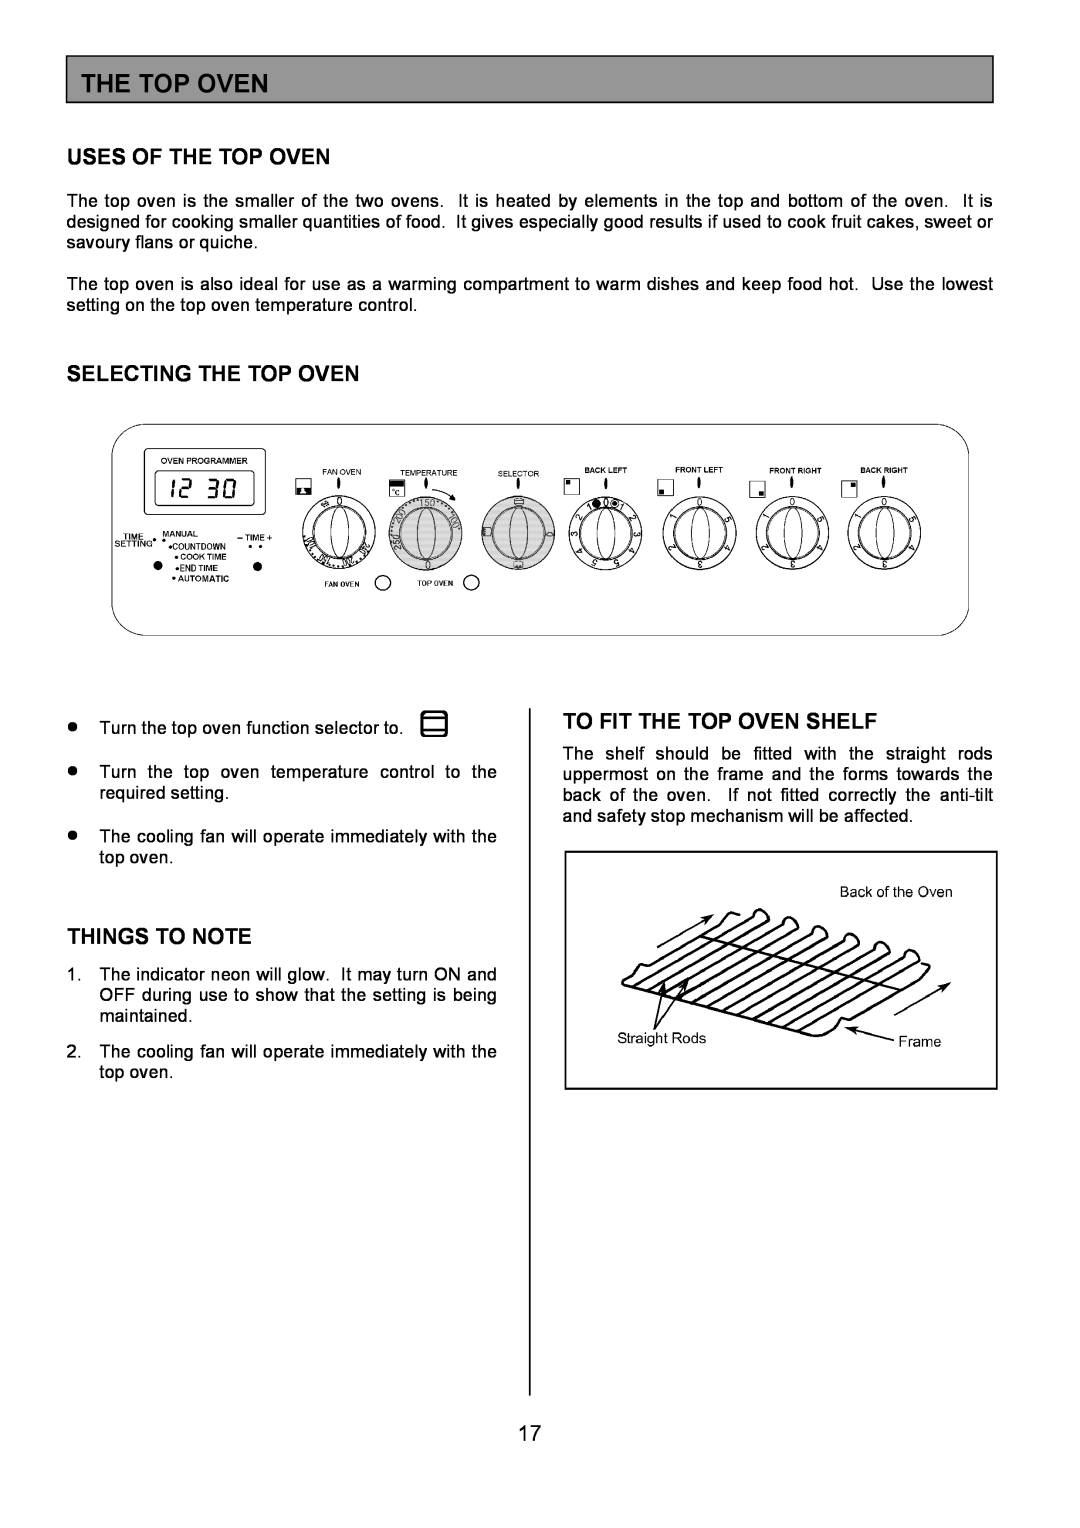 Tricity Bendix DSIE456 Uses Of The Top Oven, Selecting The Top Oven, To Fit The Top Oven Shelf, Things To Note 